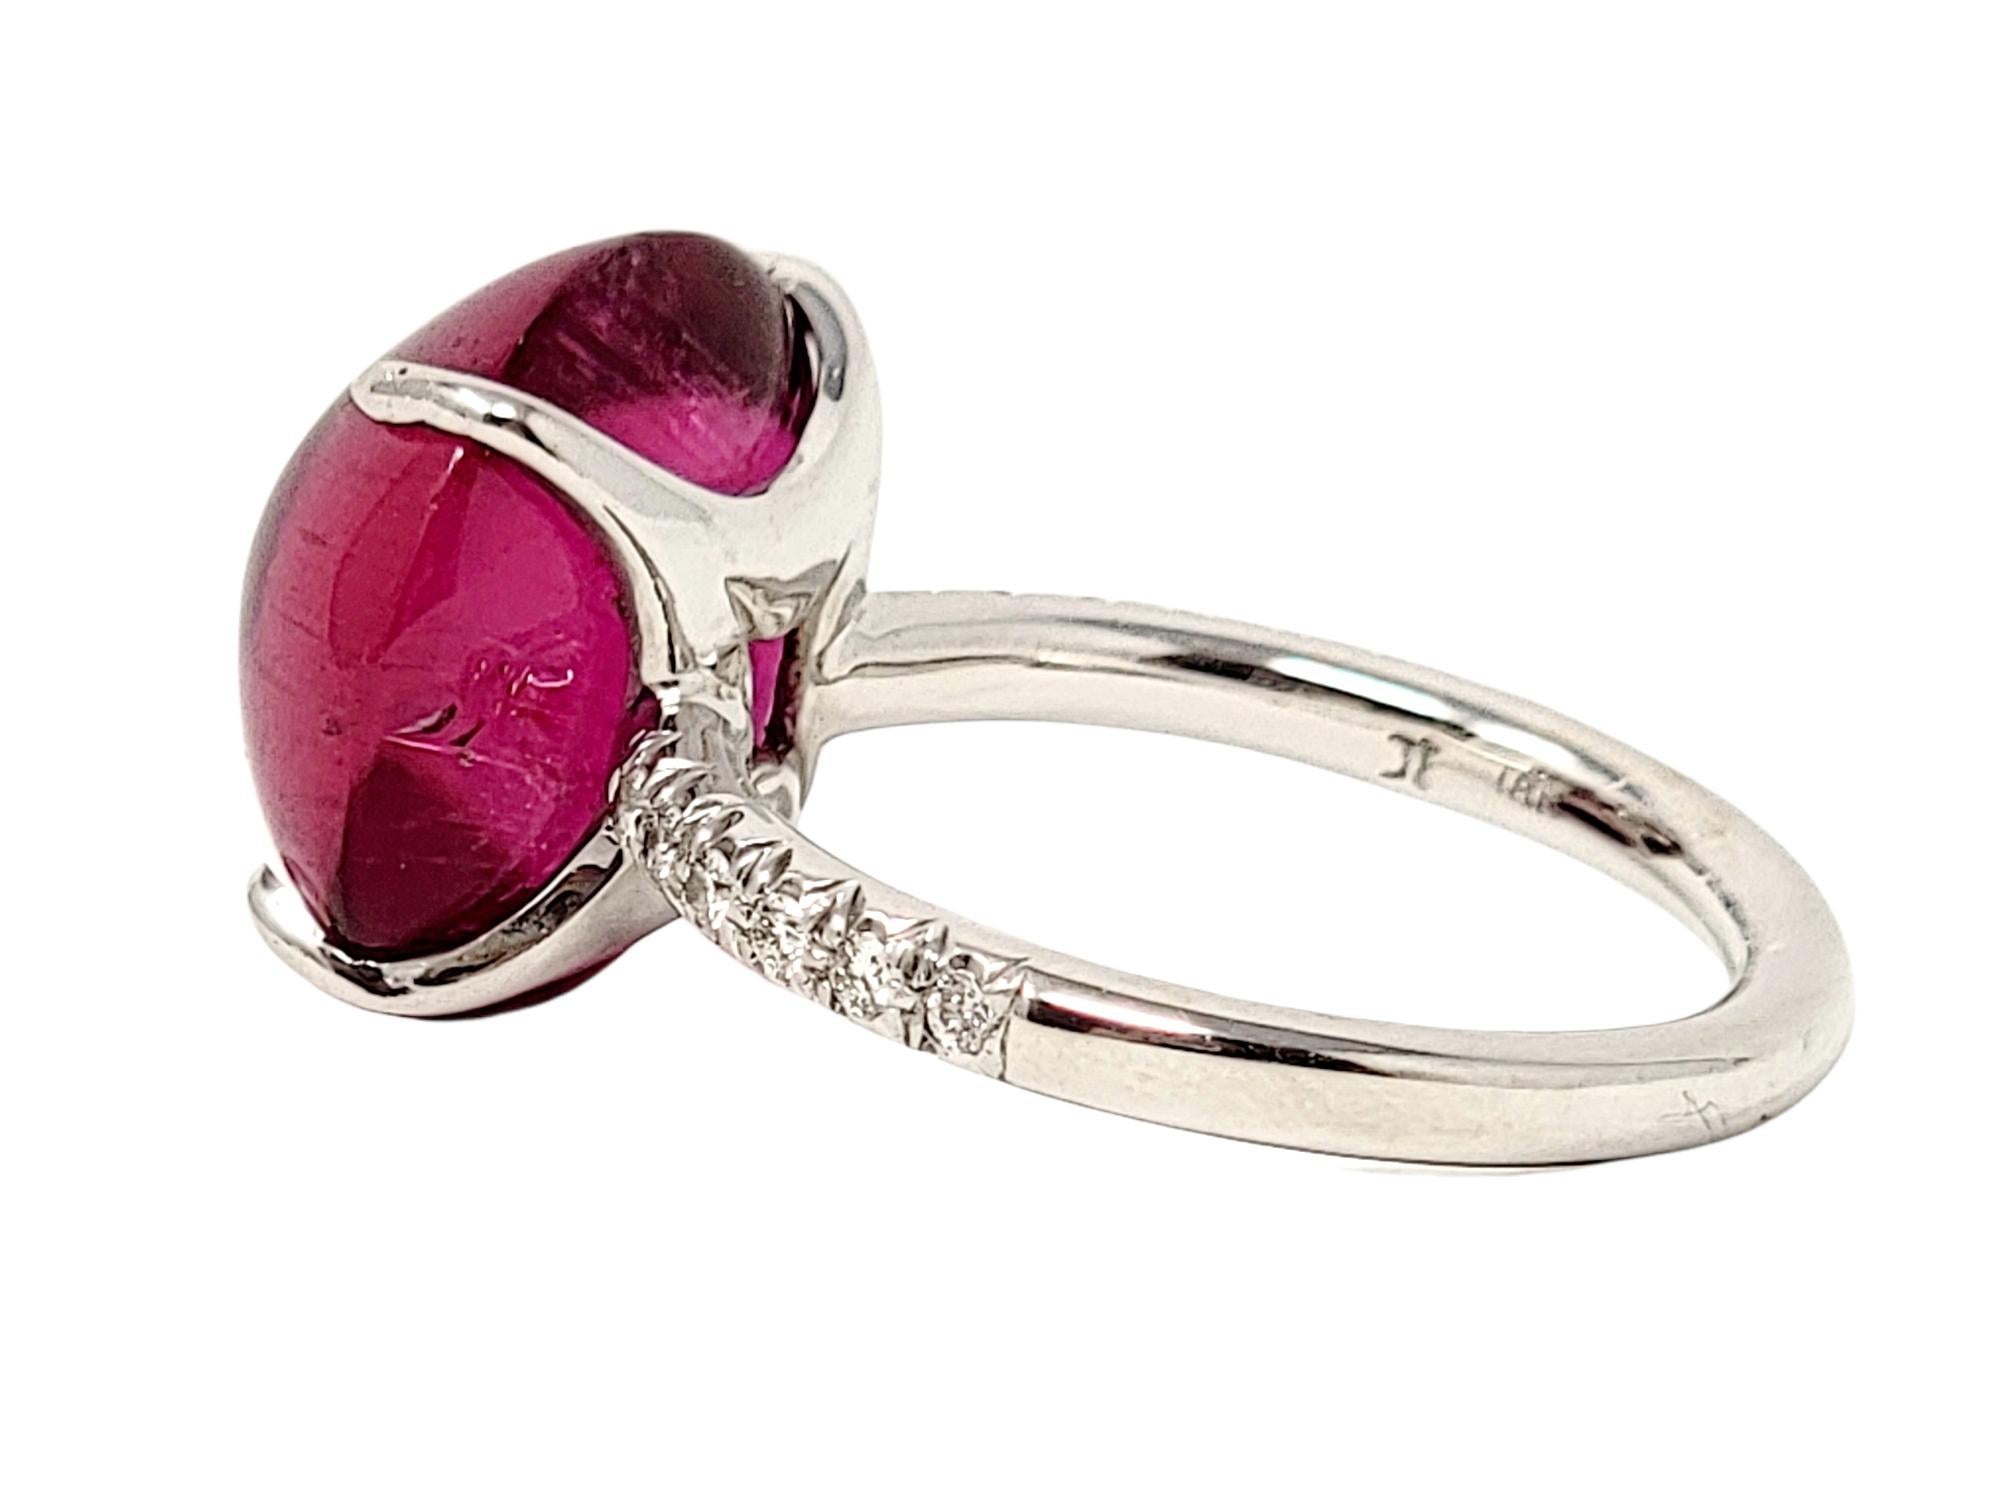 Cabochon Rubelite Solitaire 18 Karat White Gold Cocktail Ring with Pave Diamond For Sale 2